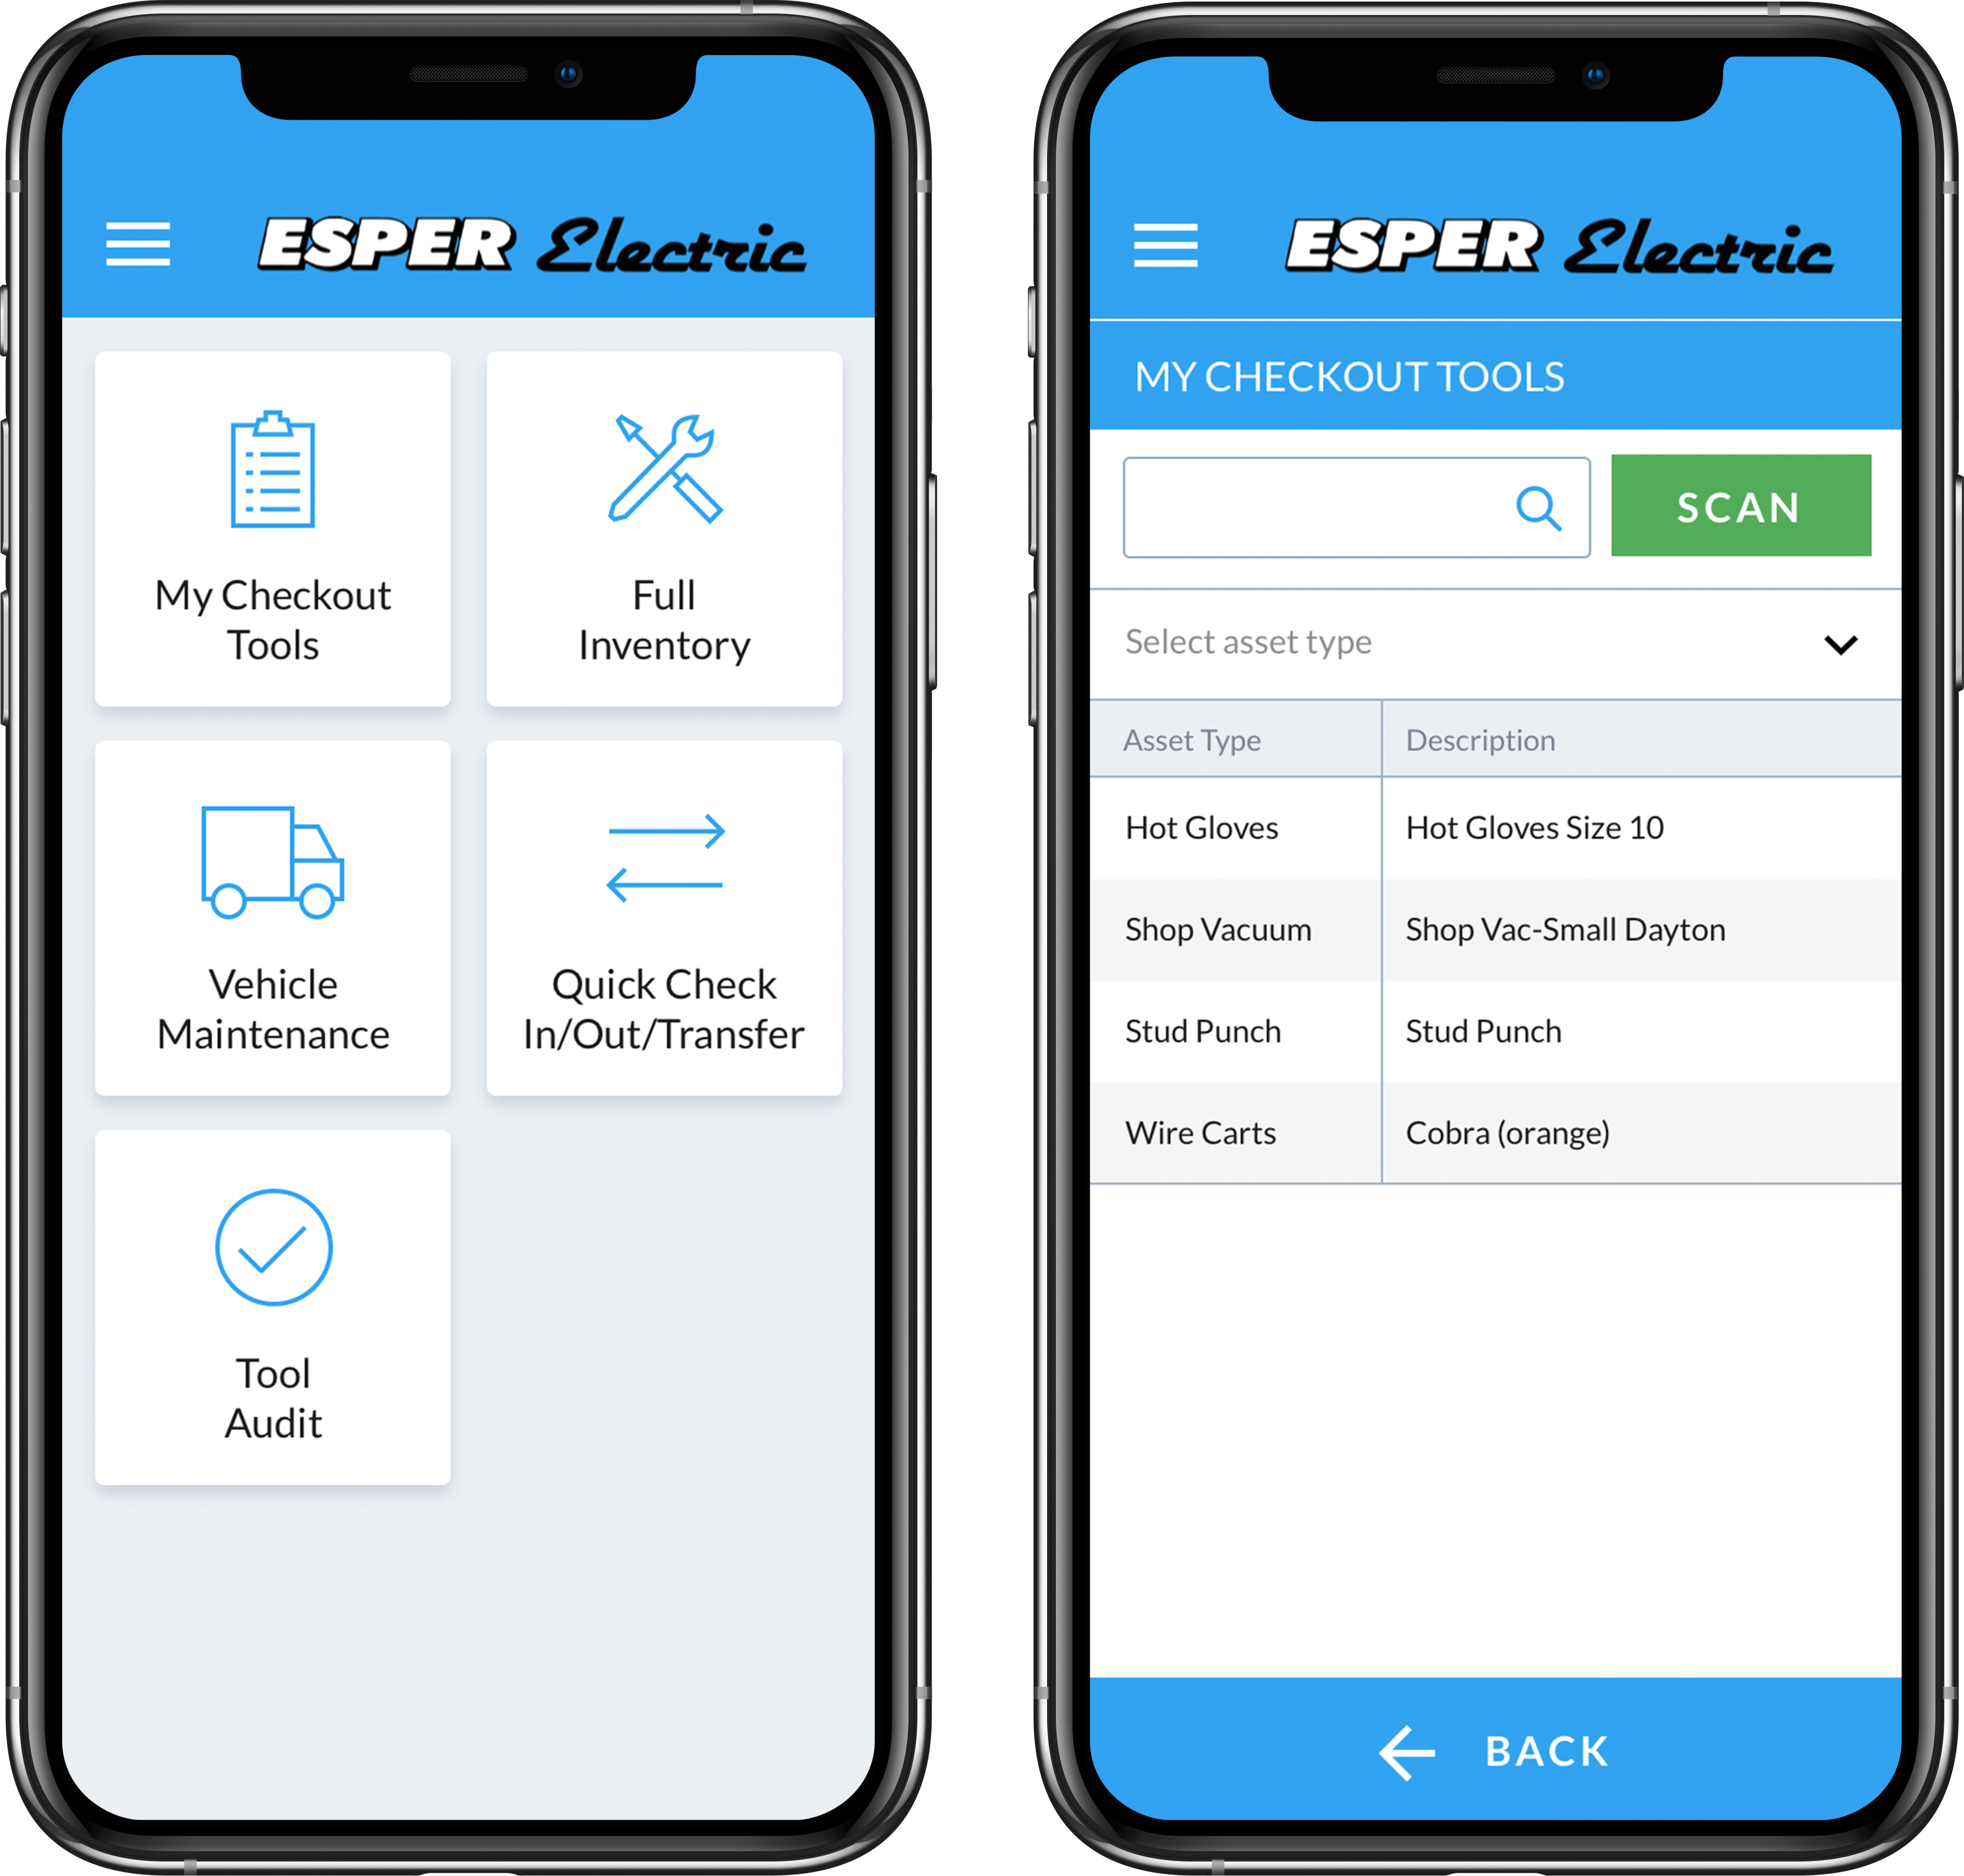 Esper Electric mobile mock up using Hick's law